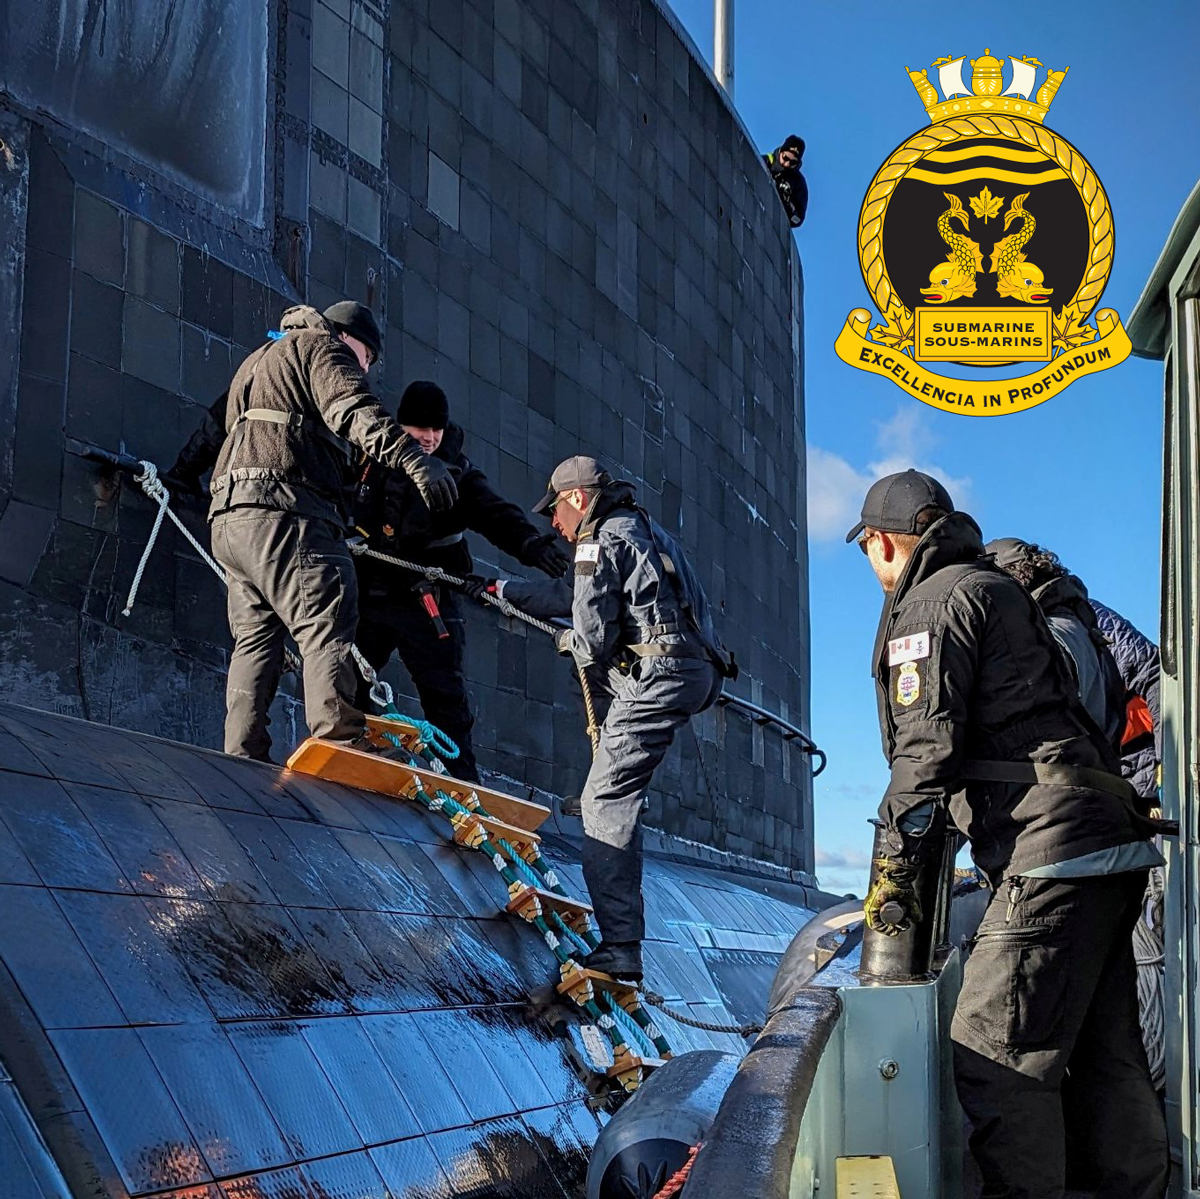 Members of CANSUBFOR HQ Det Halifax deliver mail, rations, and personnel to HMC Submarine Windsor in Halifax Harbour, with support from Canadian Forces Auxiliary Vessel Granville. Photo: Lt(N) Halerewich.
